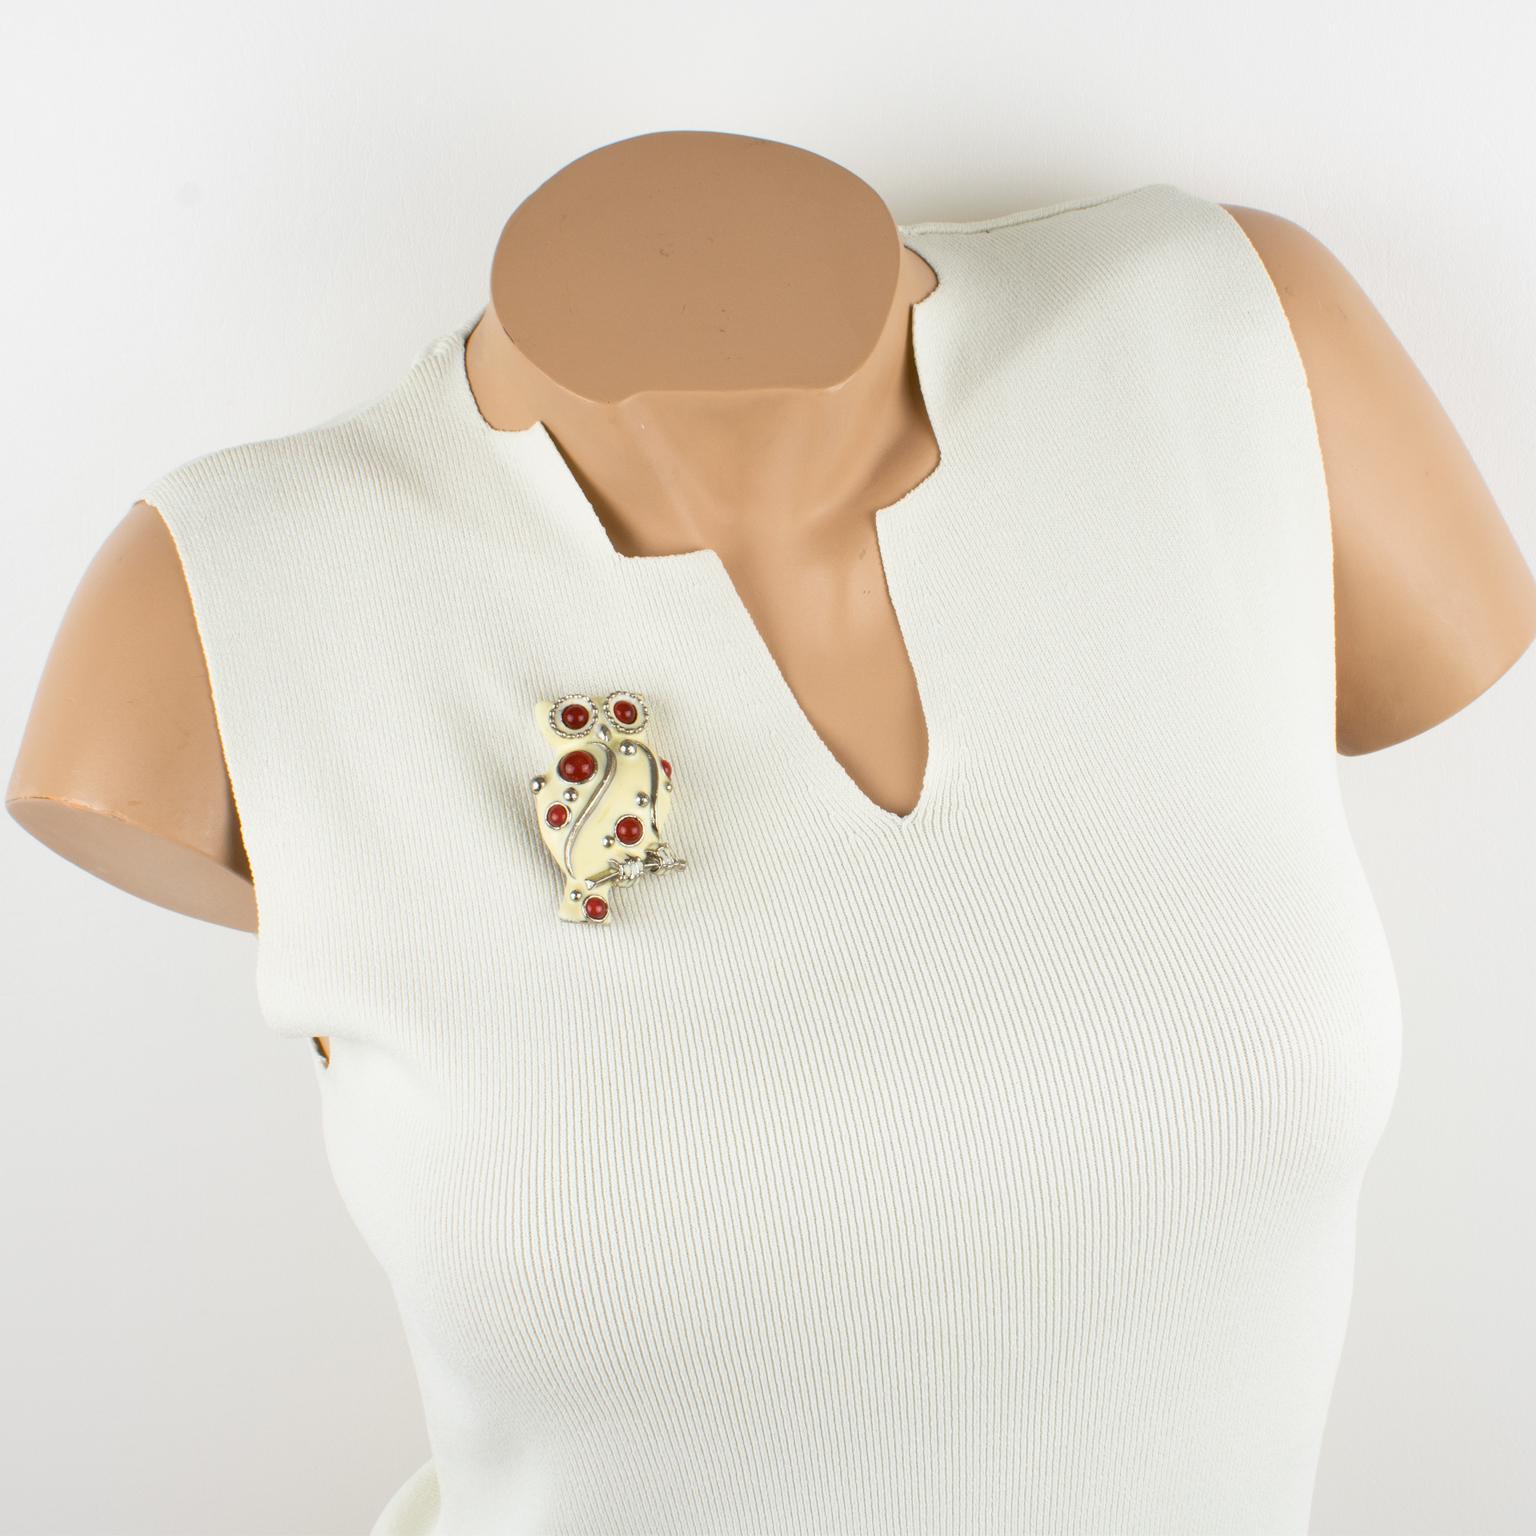 This lovely Lanvin Paris pin brooch features an owl with silvered metal framing topped with off-white enamel and complemented with Gripoix poured glass cabochons in carnelian color. The piece has a security closing clasp at the back and is signed